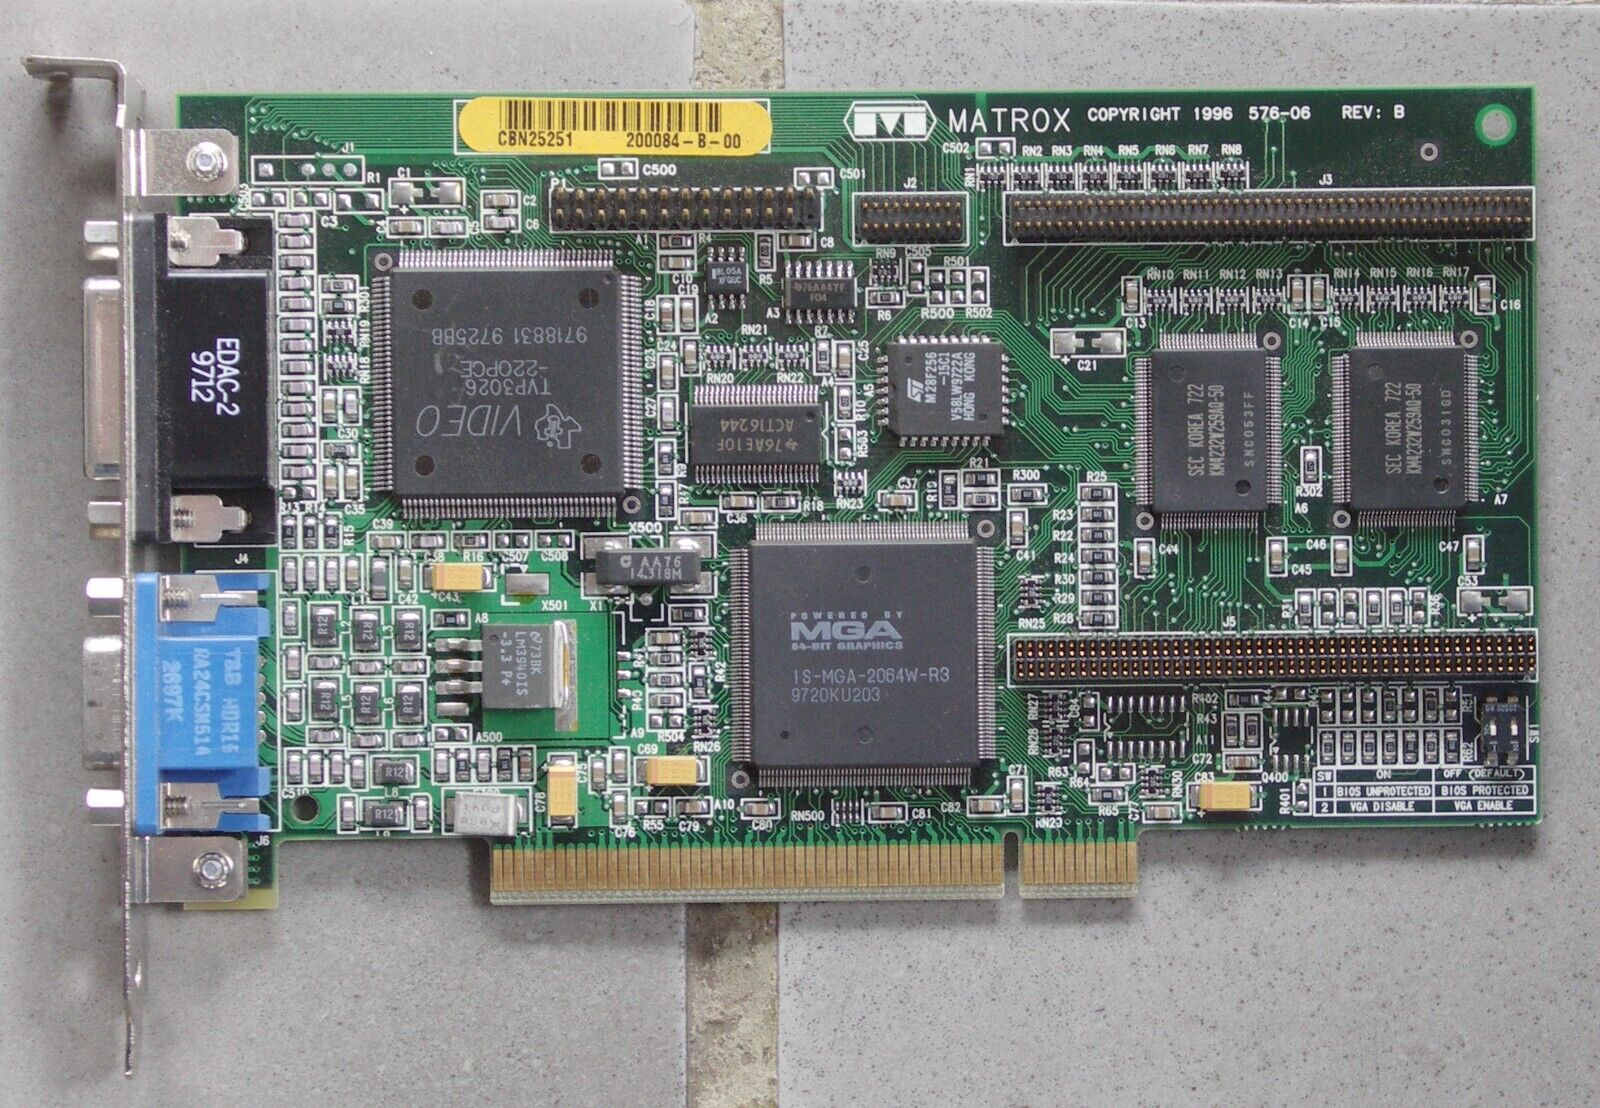 Matrox/HP 5064-0285 2MB VGA PCI working pull excellent